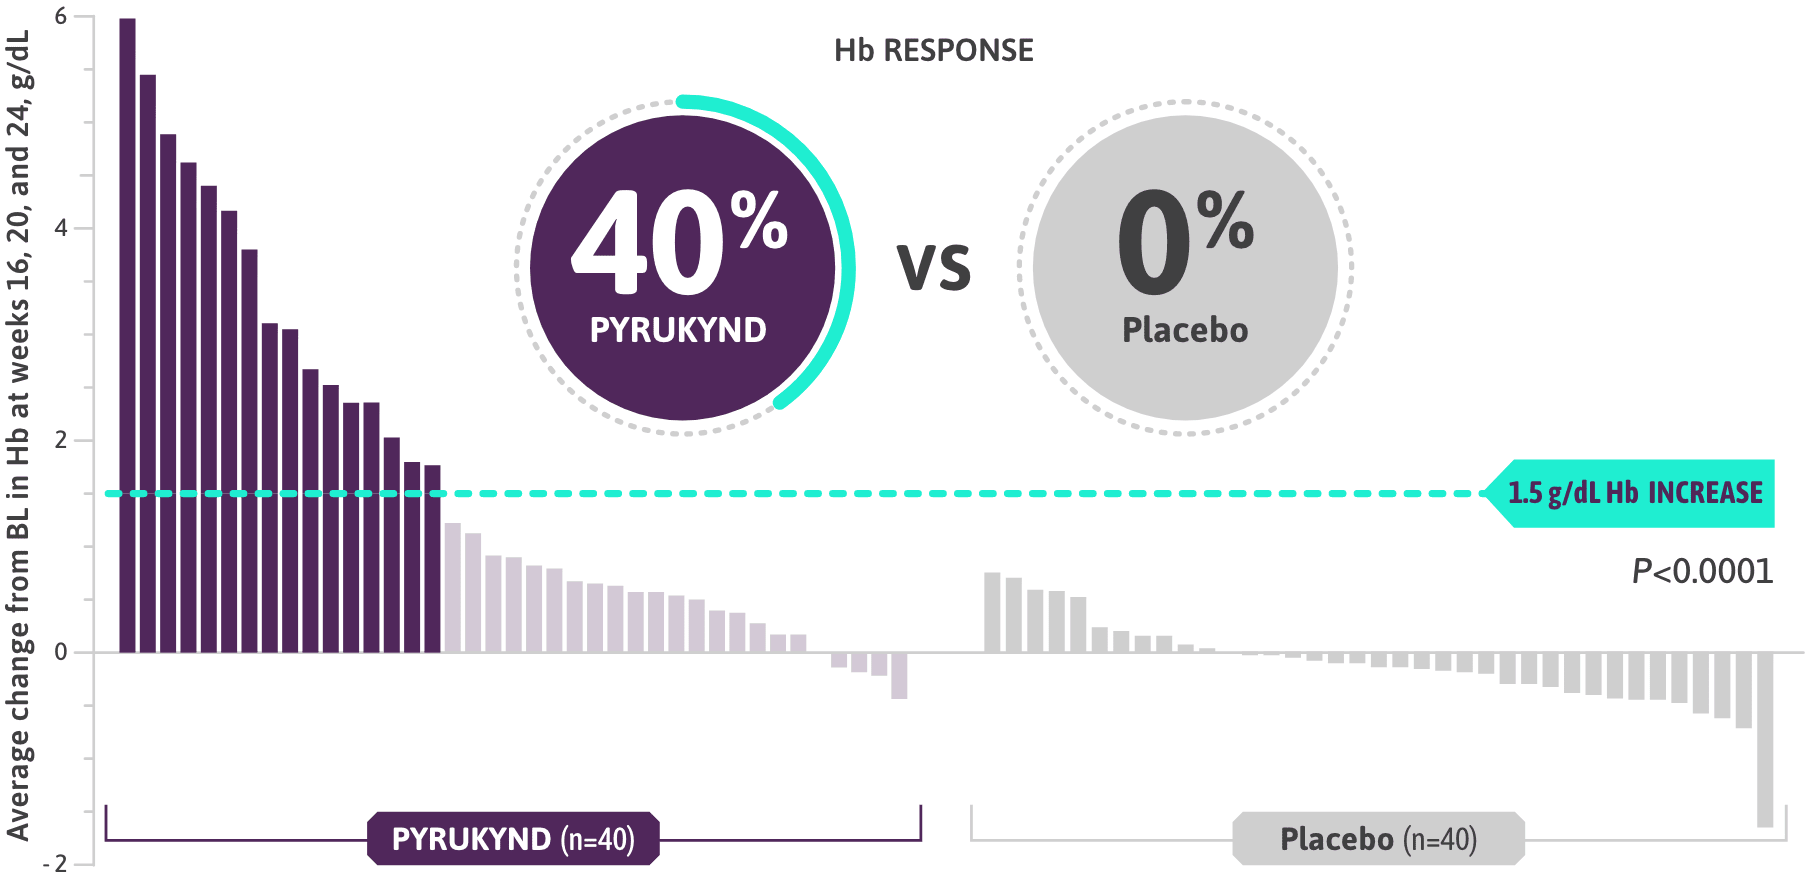 graph illustrating a 40% increase in Hb on PYRUKYND versus 0% increase on placebo